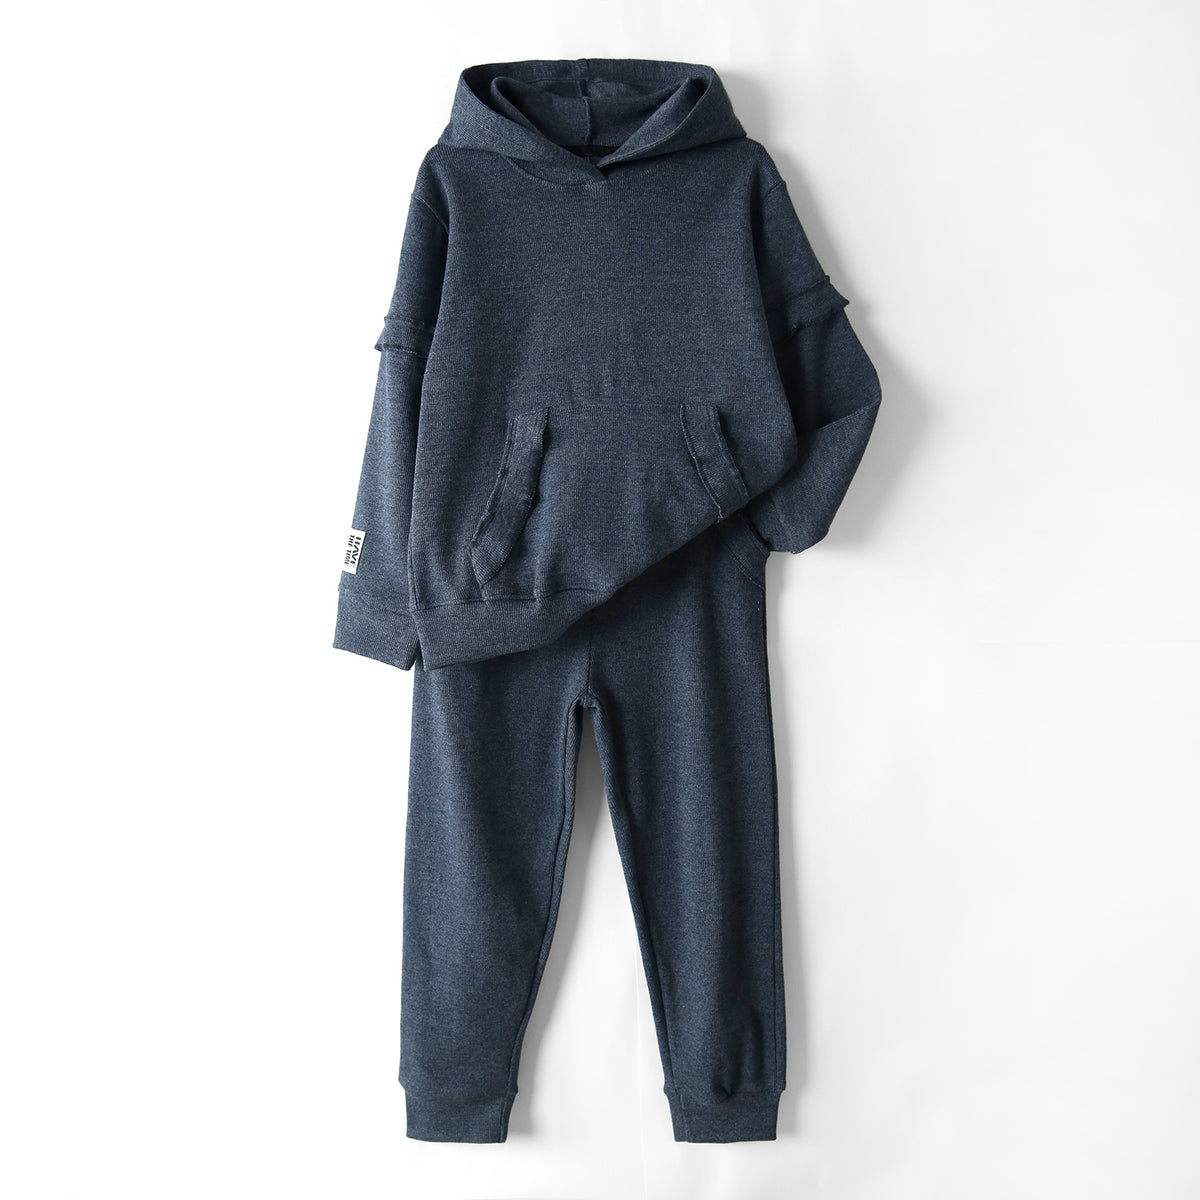 Premium Quality Blue 2 Piece Frill Tracksuit For Girls